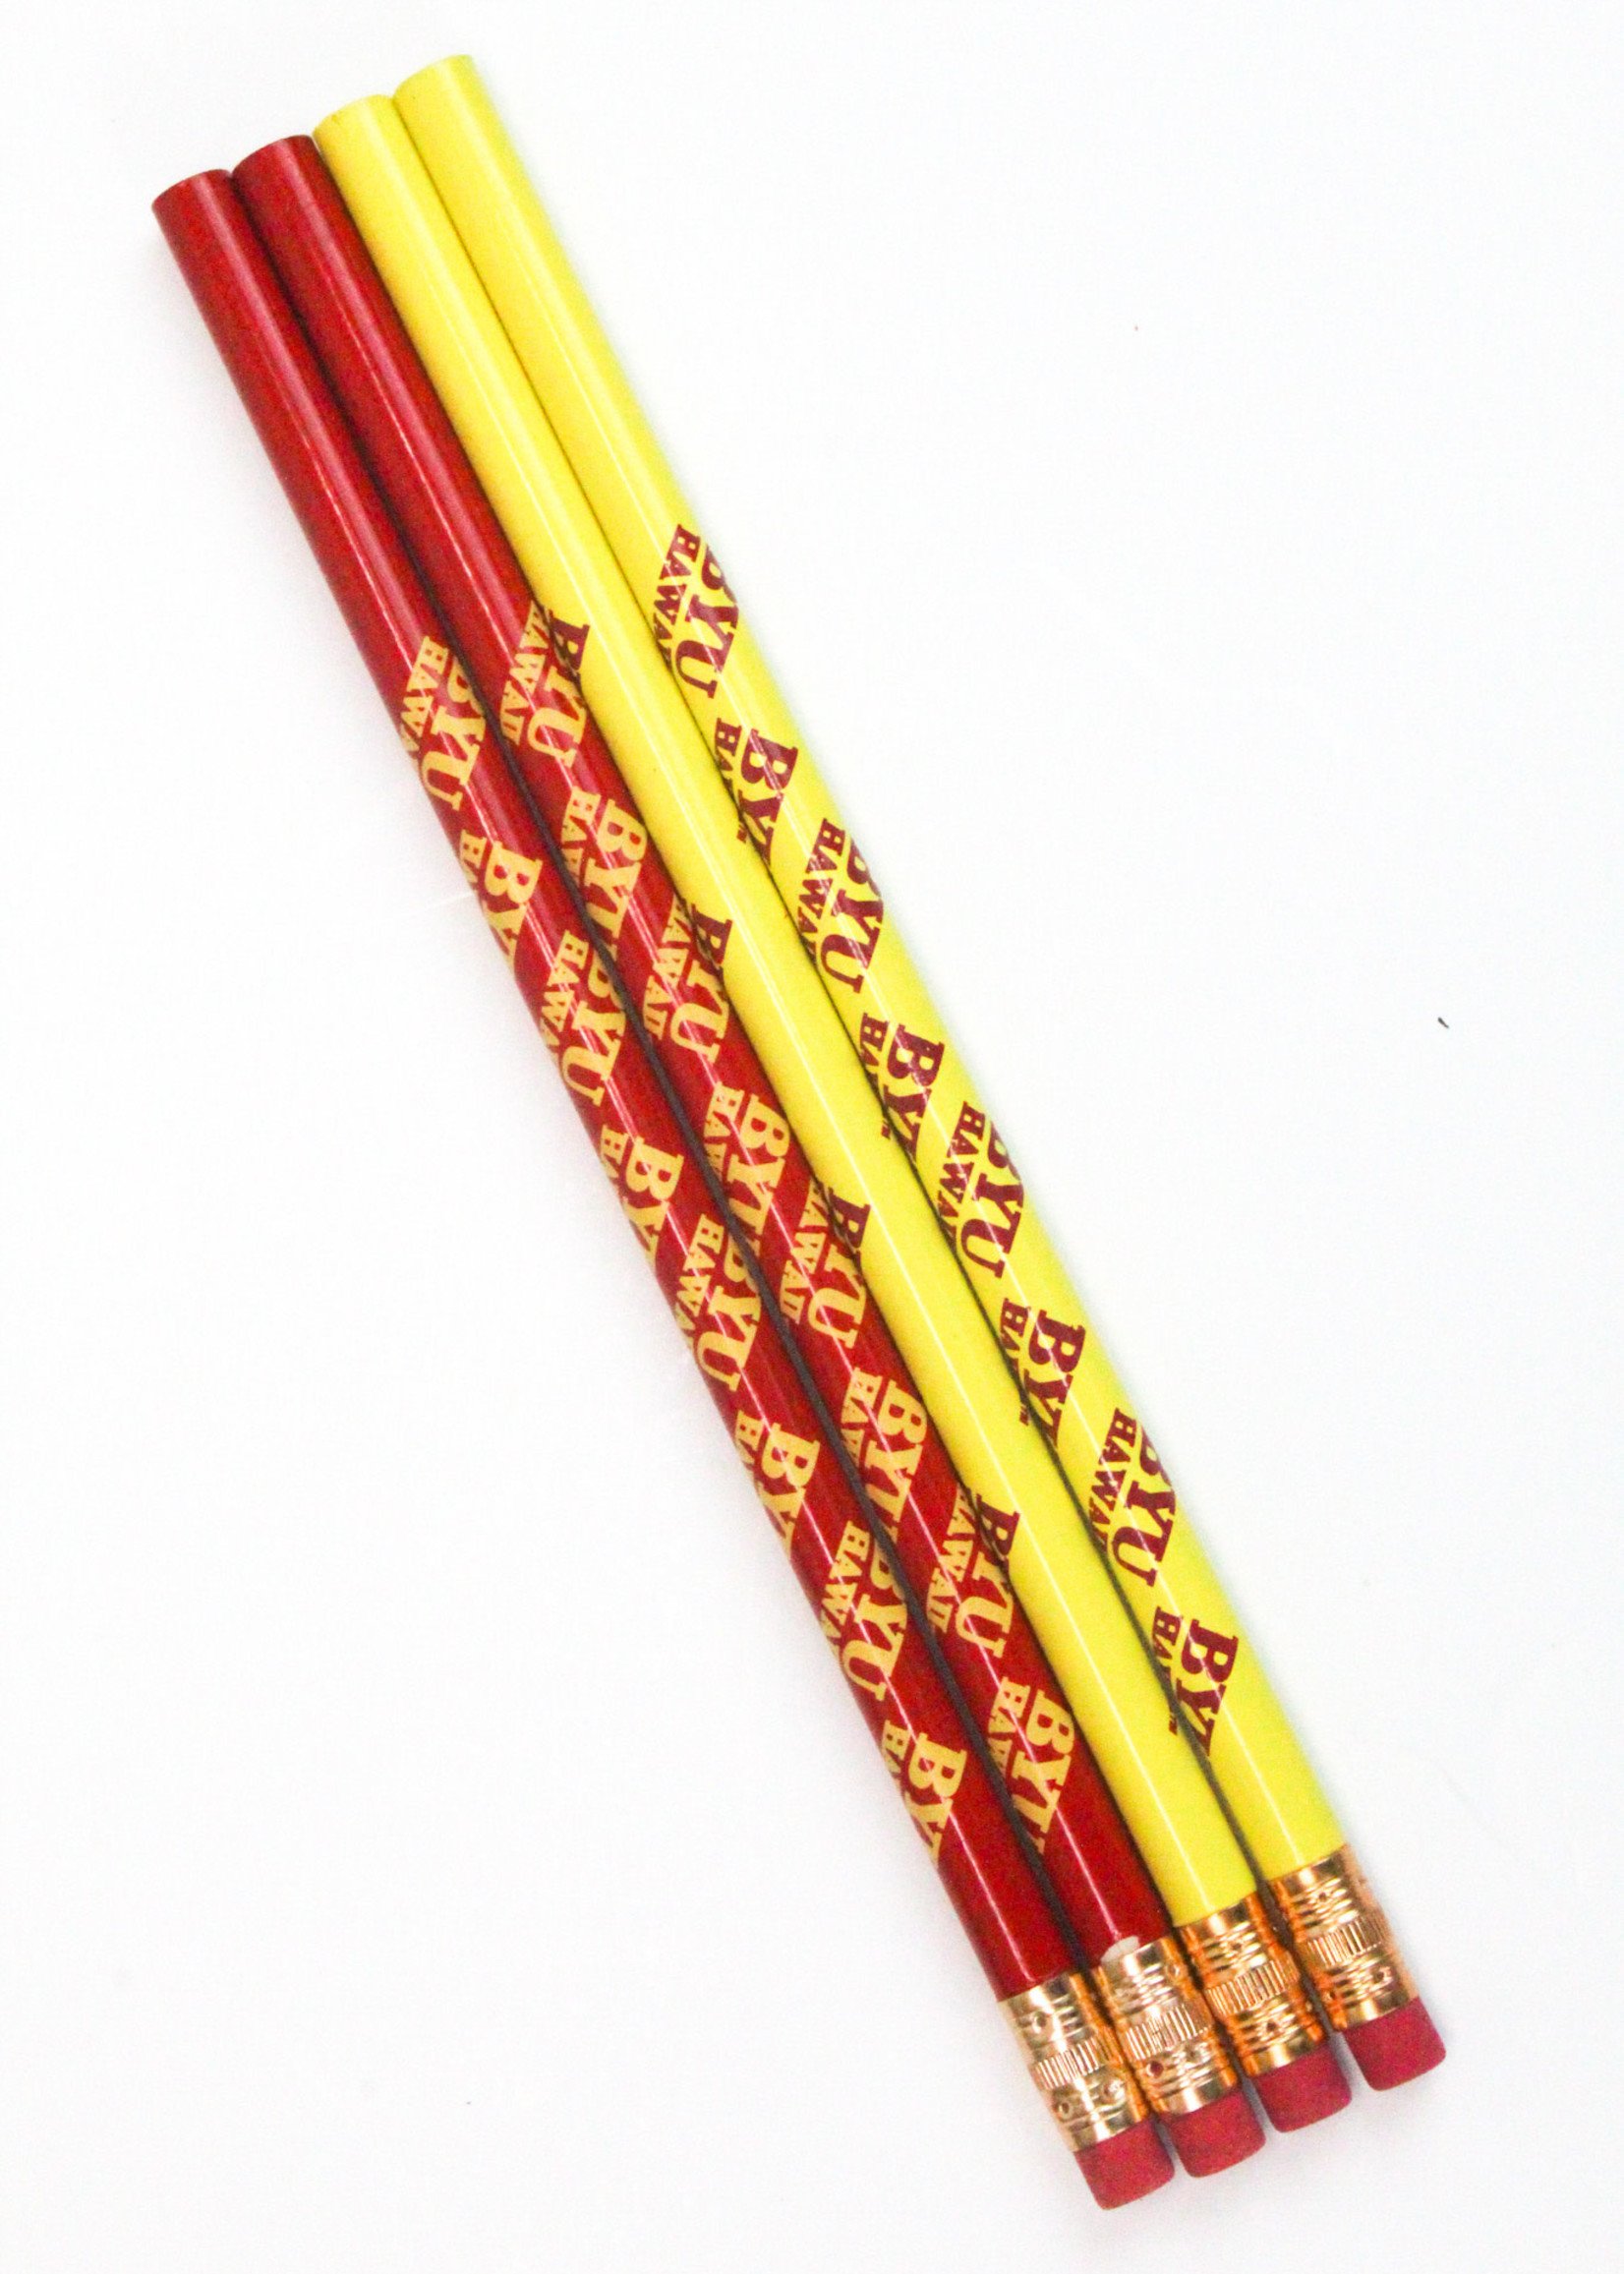 Pencils in a Pack Of 4, BYUH Logo